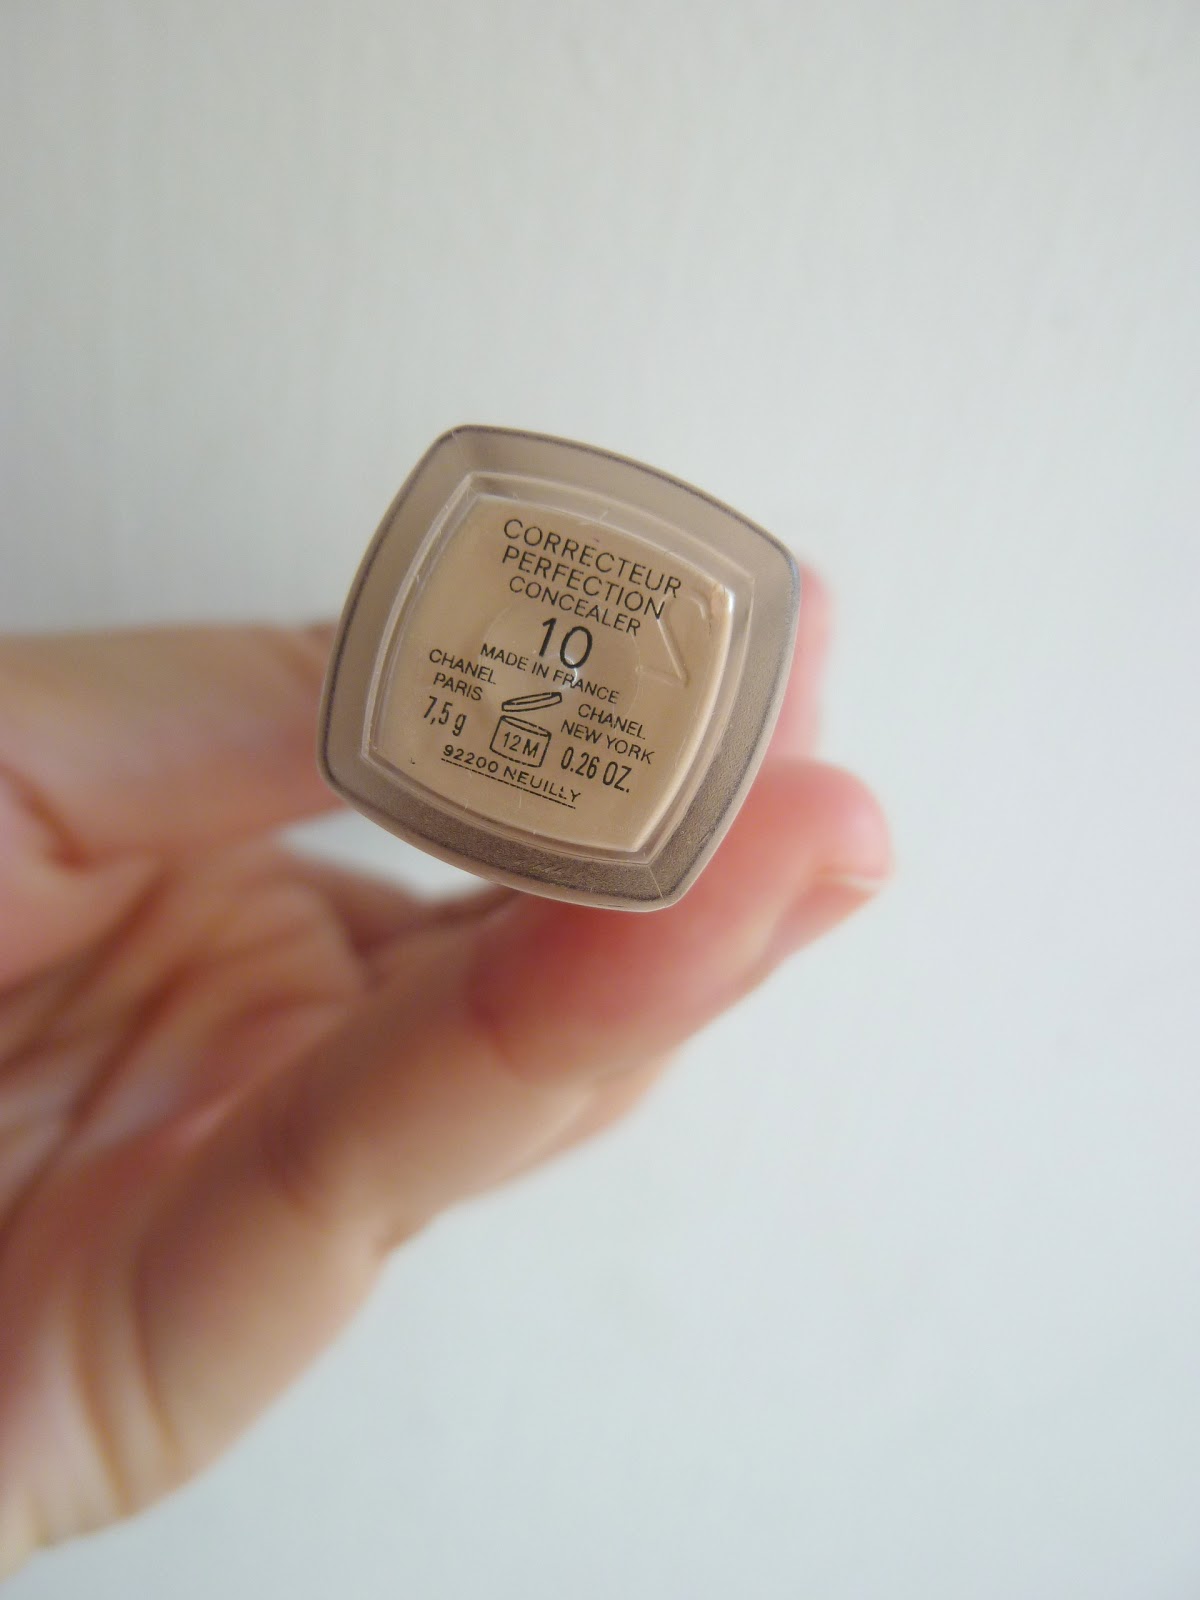 Slightly Obsessed. : Chanel Correcteur Perfection Long- Lasting Concealer  Review